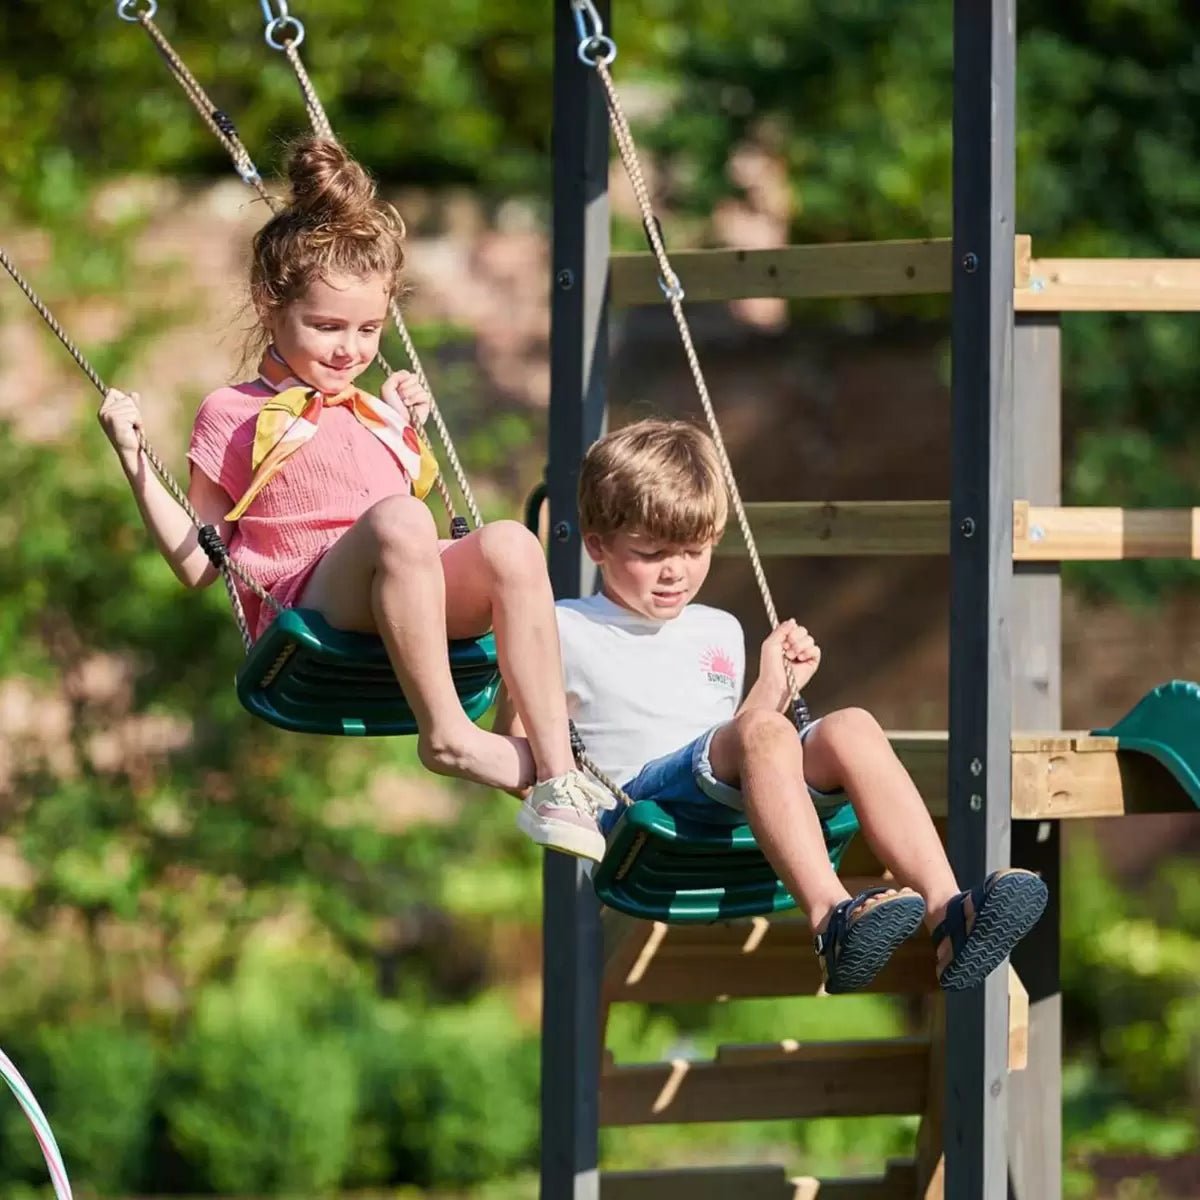 Plum Barbary Play centre - Swing into Fun - Grab Yours Now!